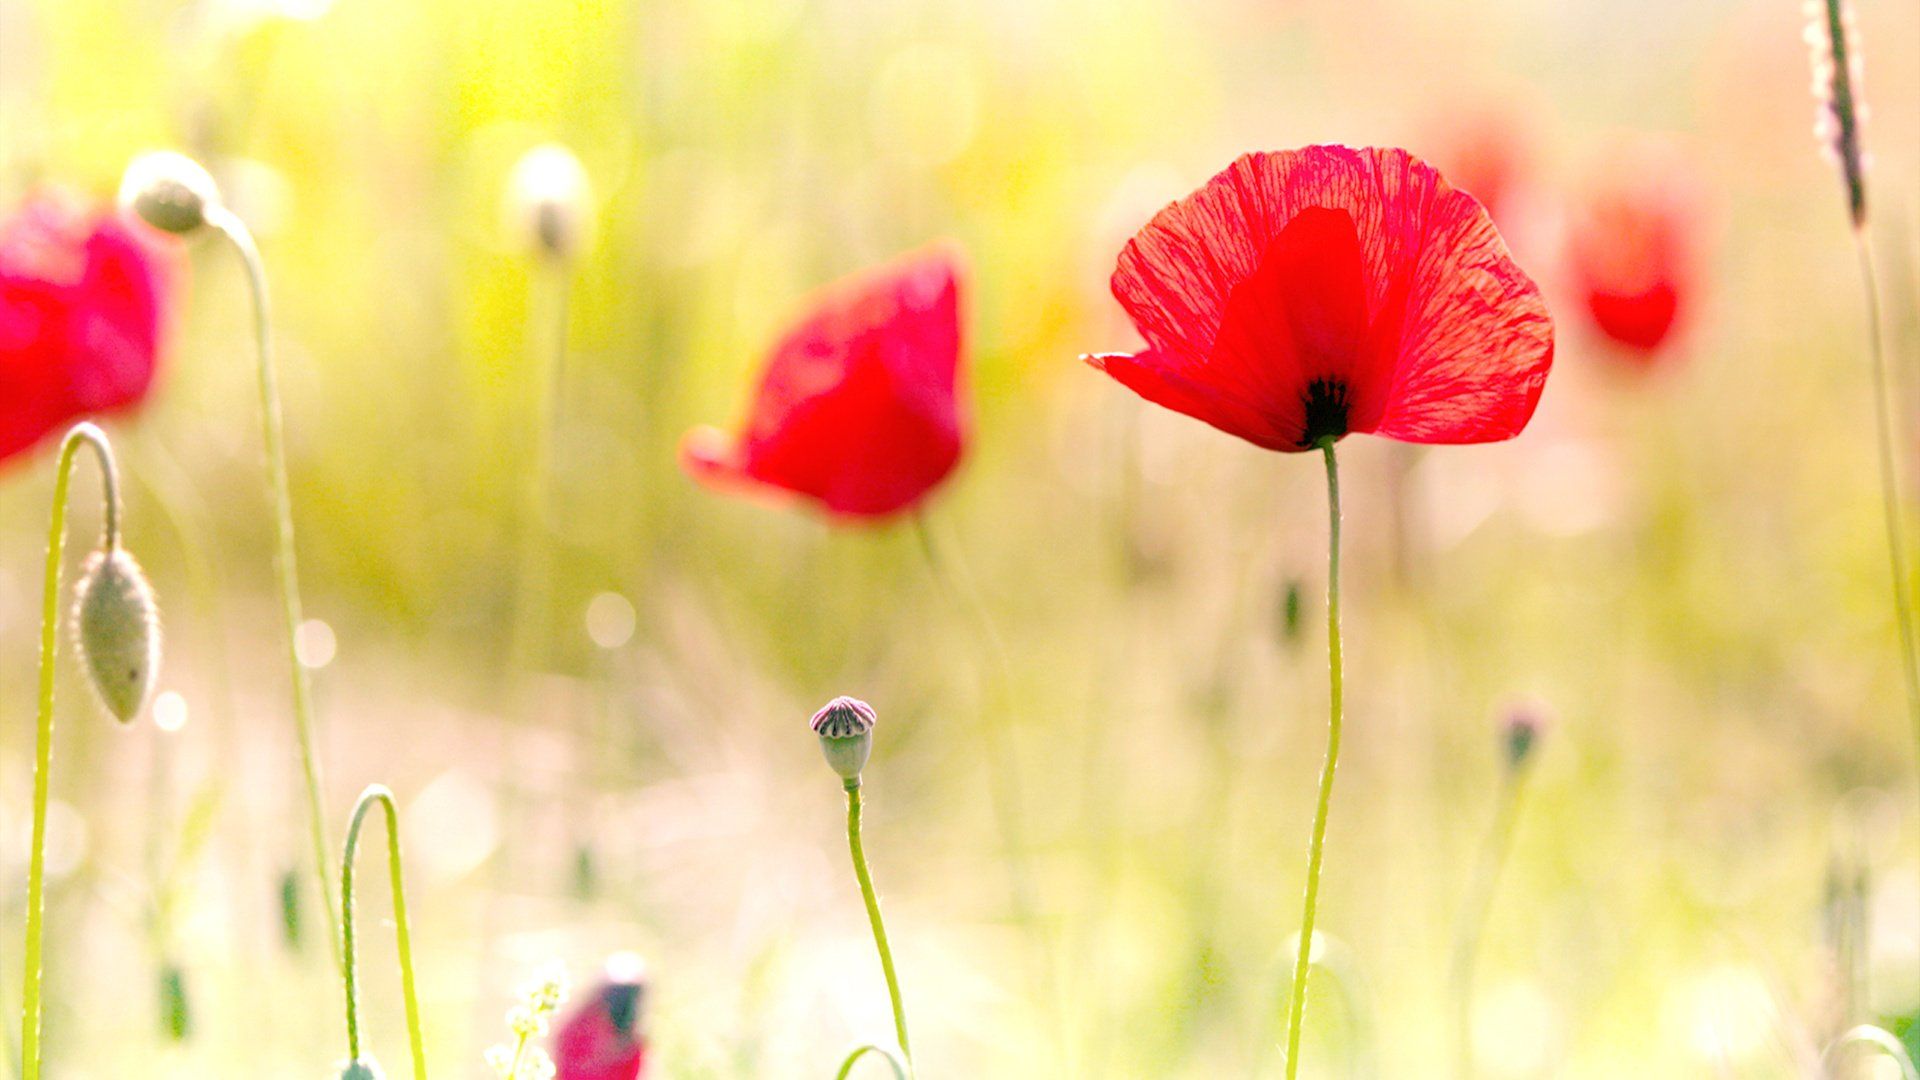 Poppy wallpaper and themes